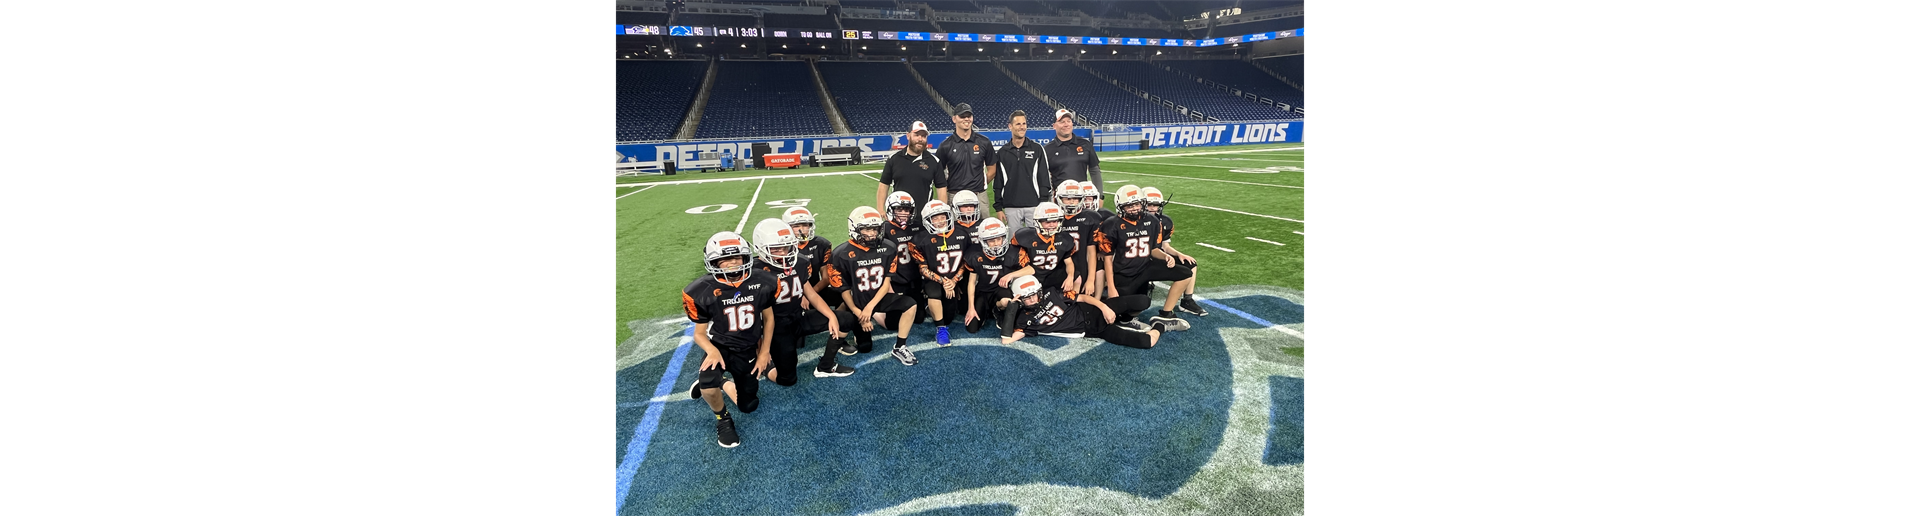 Team Gibson Ford Field